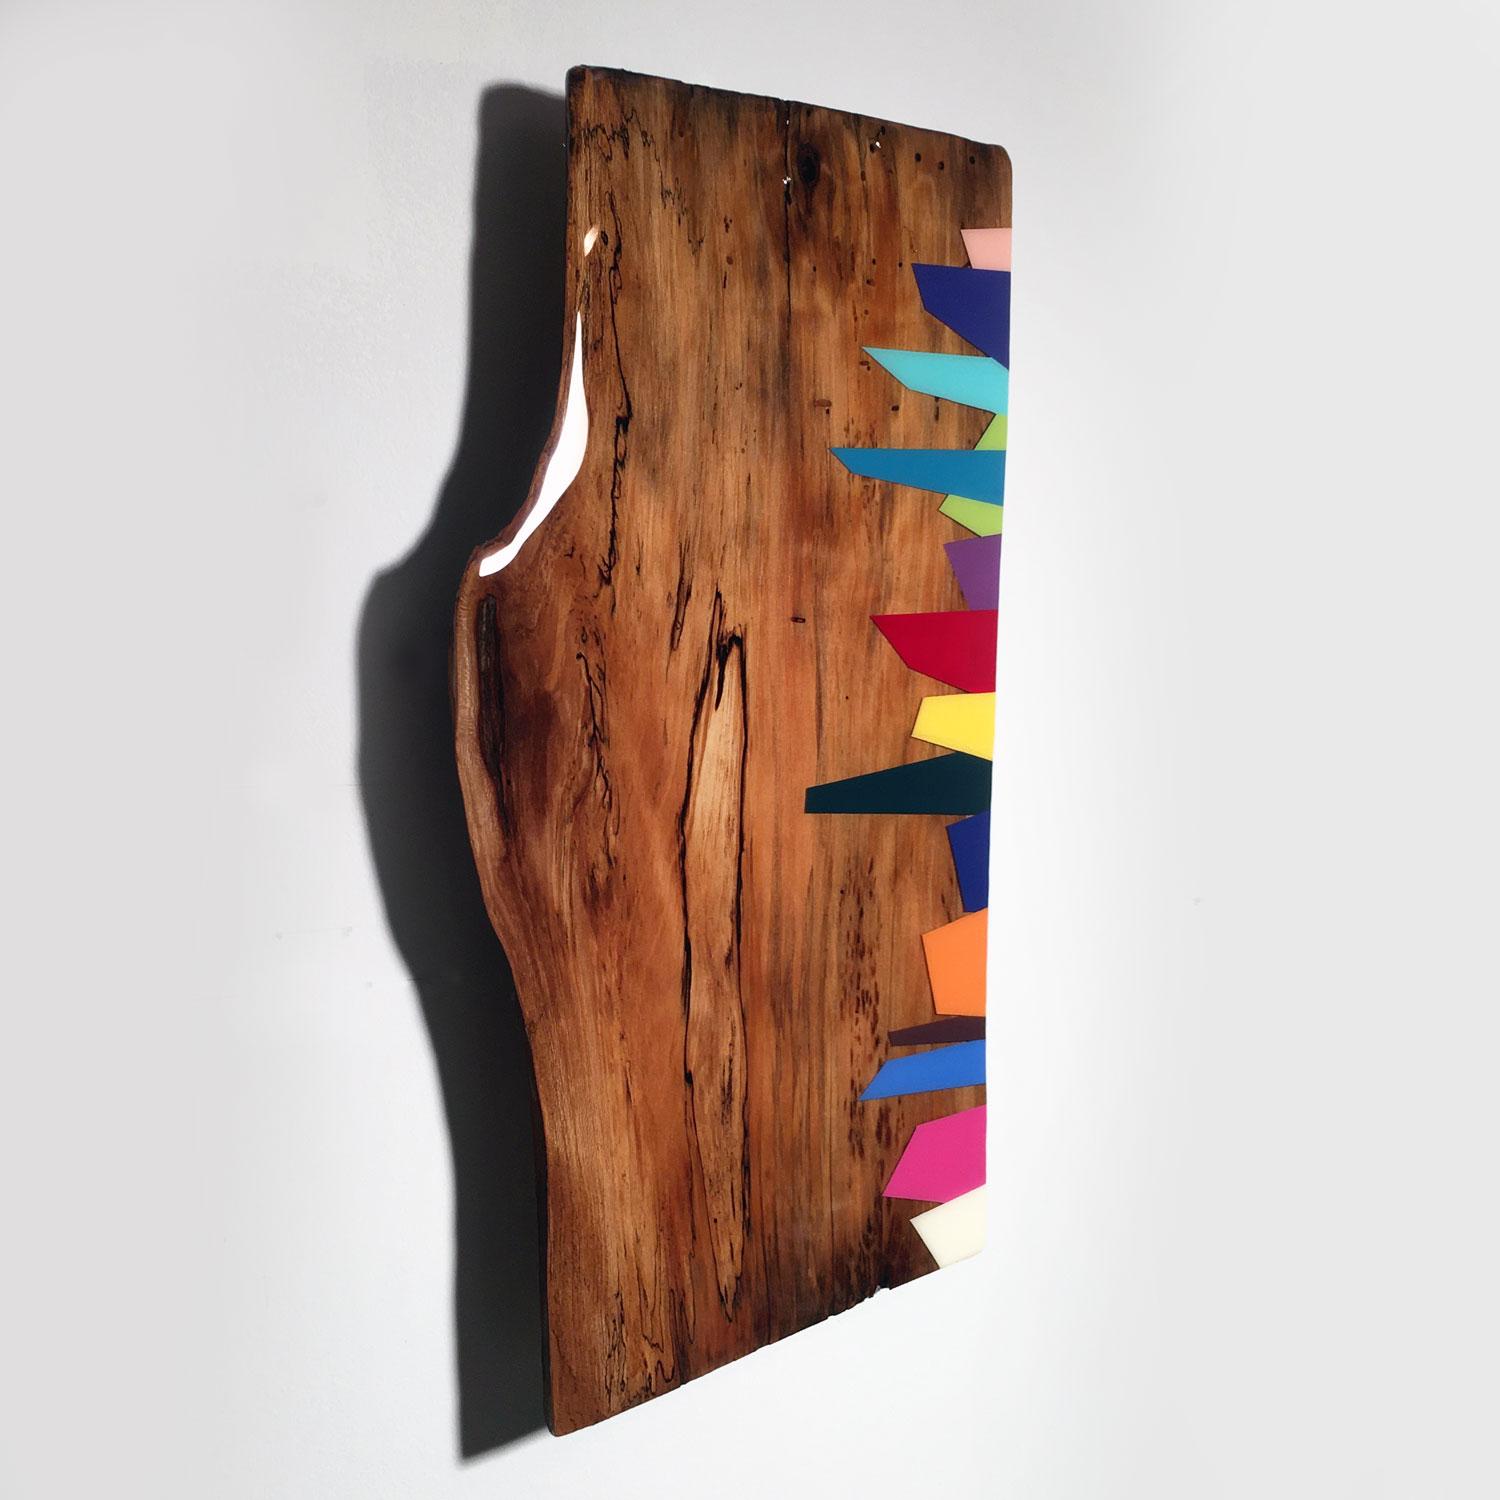 Mini Leaner #8, Contemporary Painted Rainbow Wall Sculpture, Shiny Exotic Wood - Brown Abstract Sculpture by David E. Peterson